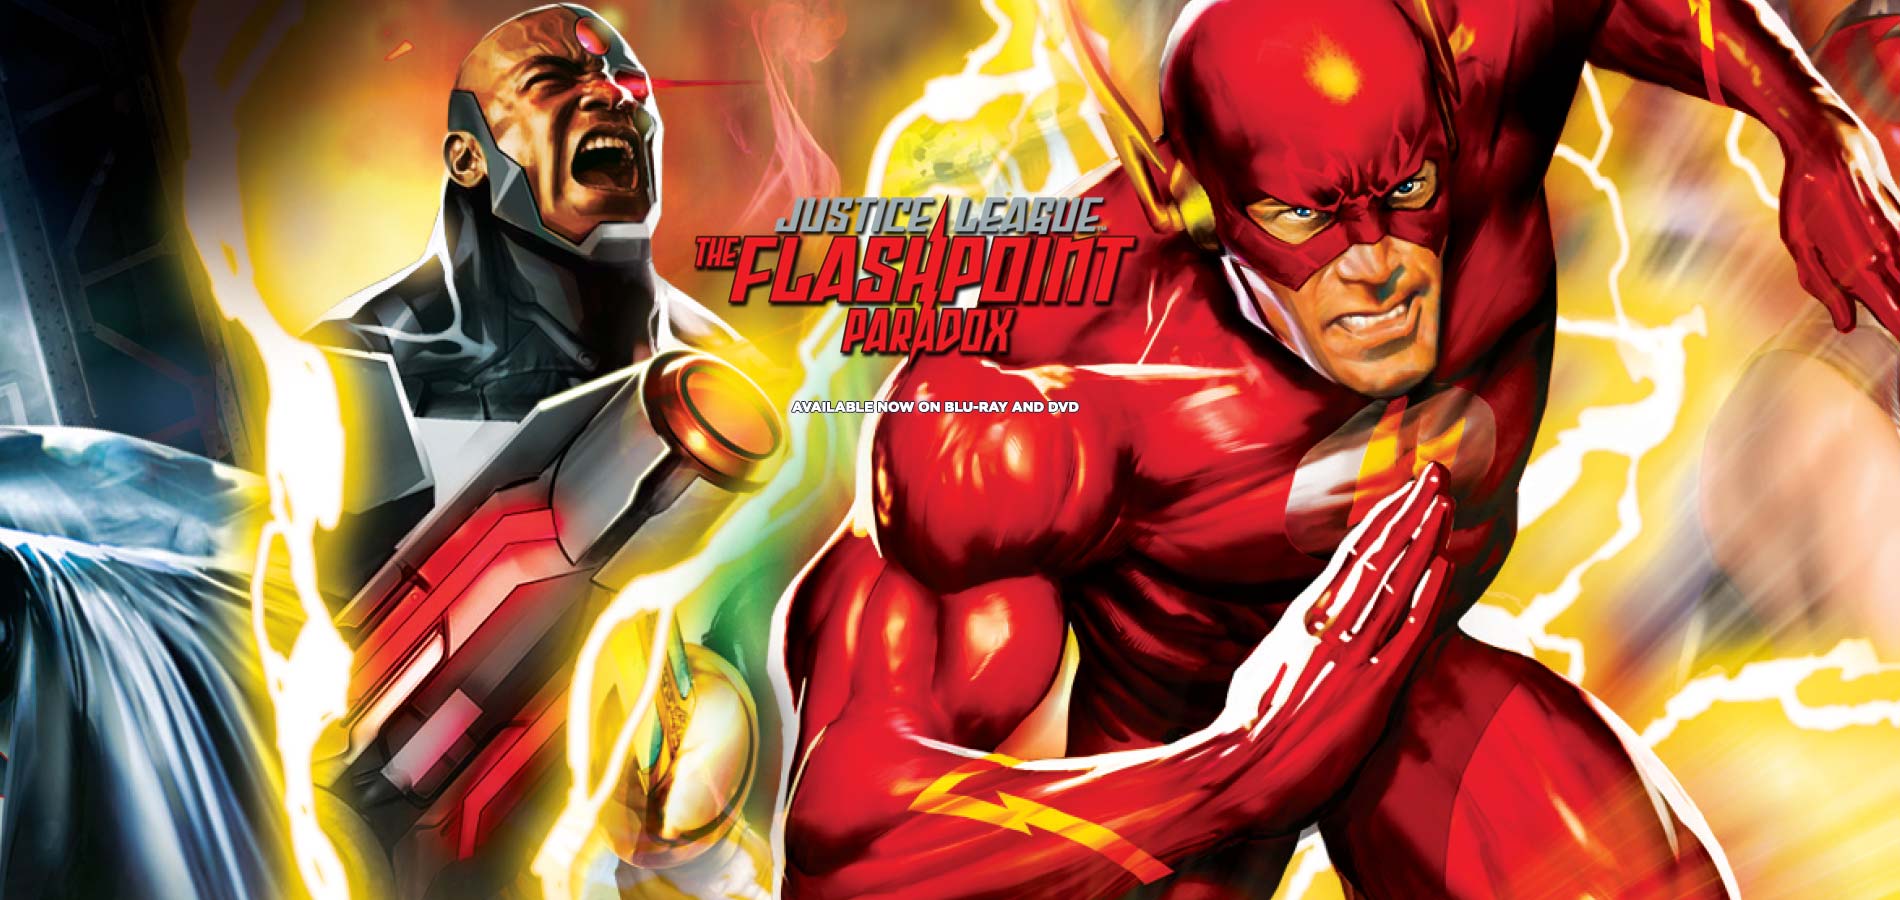 Justice League: The Flashpoint Paradox HD wallpapers, Desktop wallpaper - most viewed